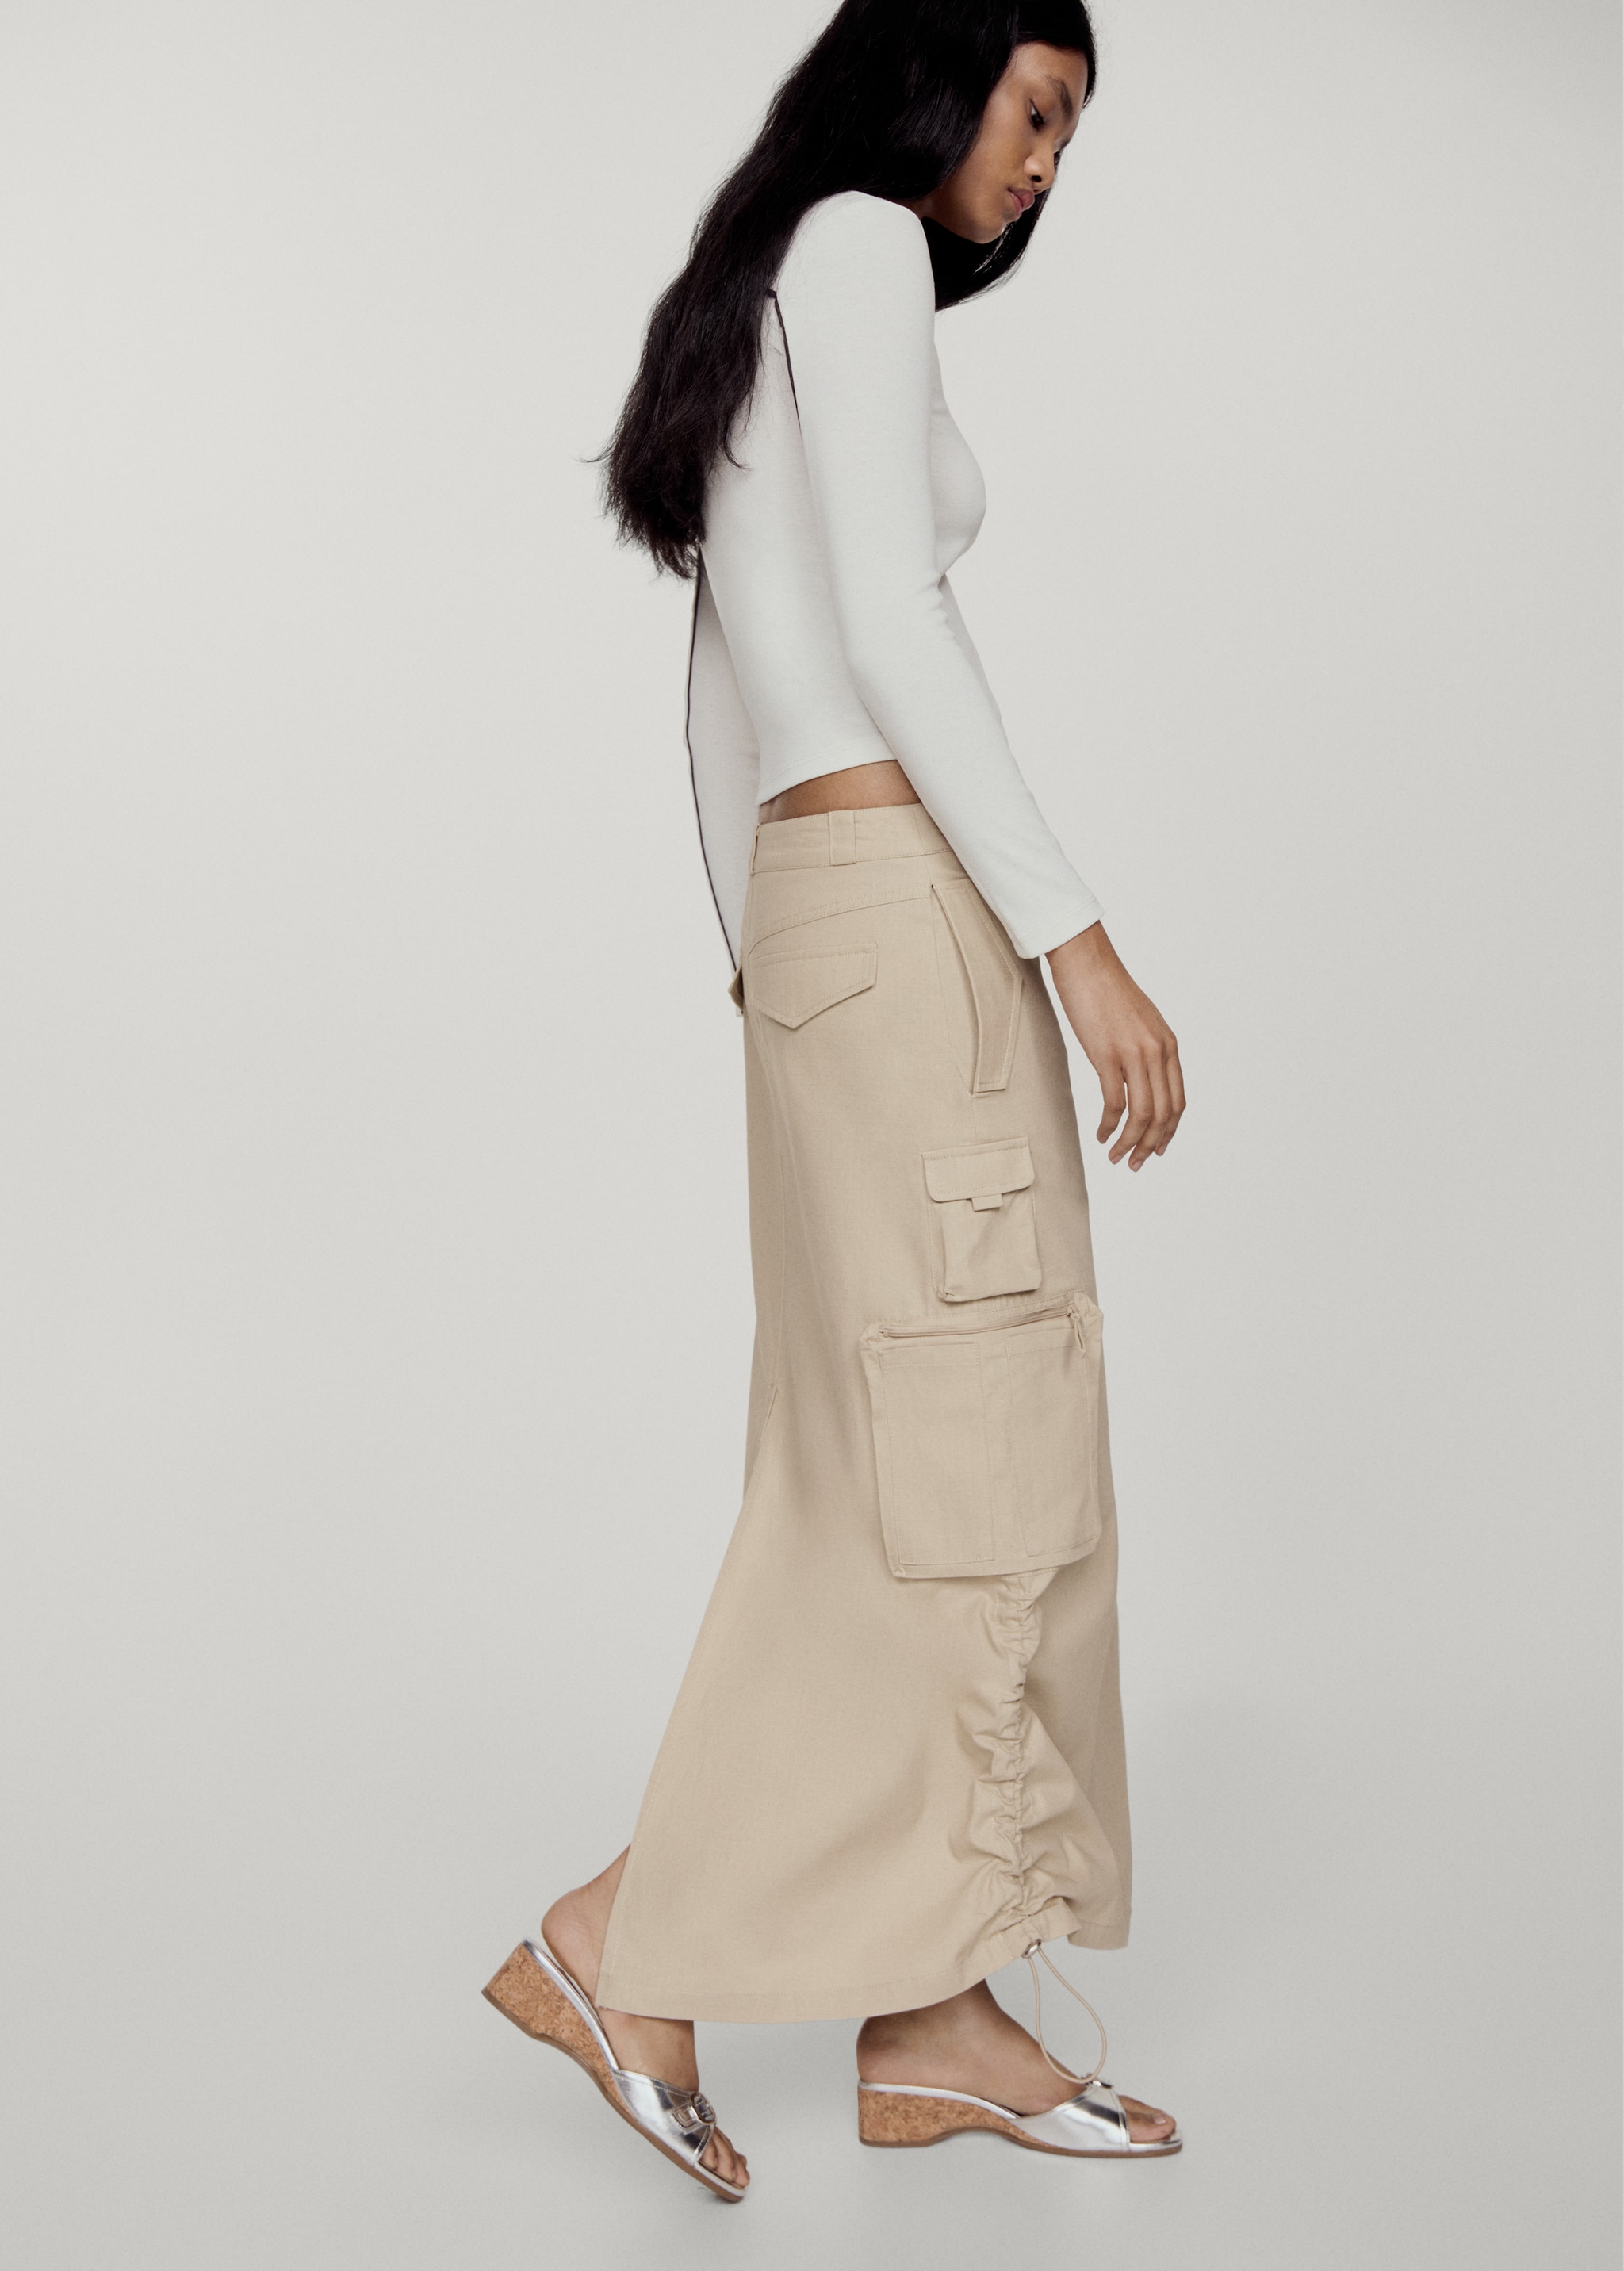 Parachute skirt with cargo pockets - Details of the article 6